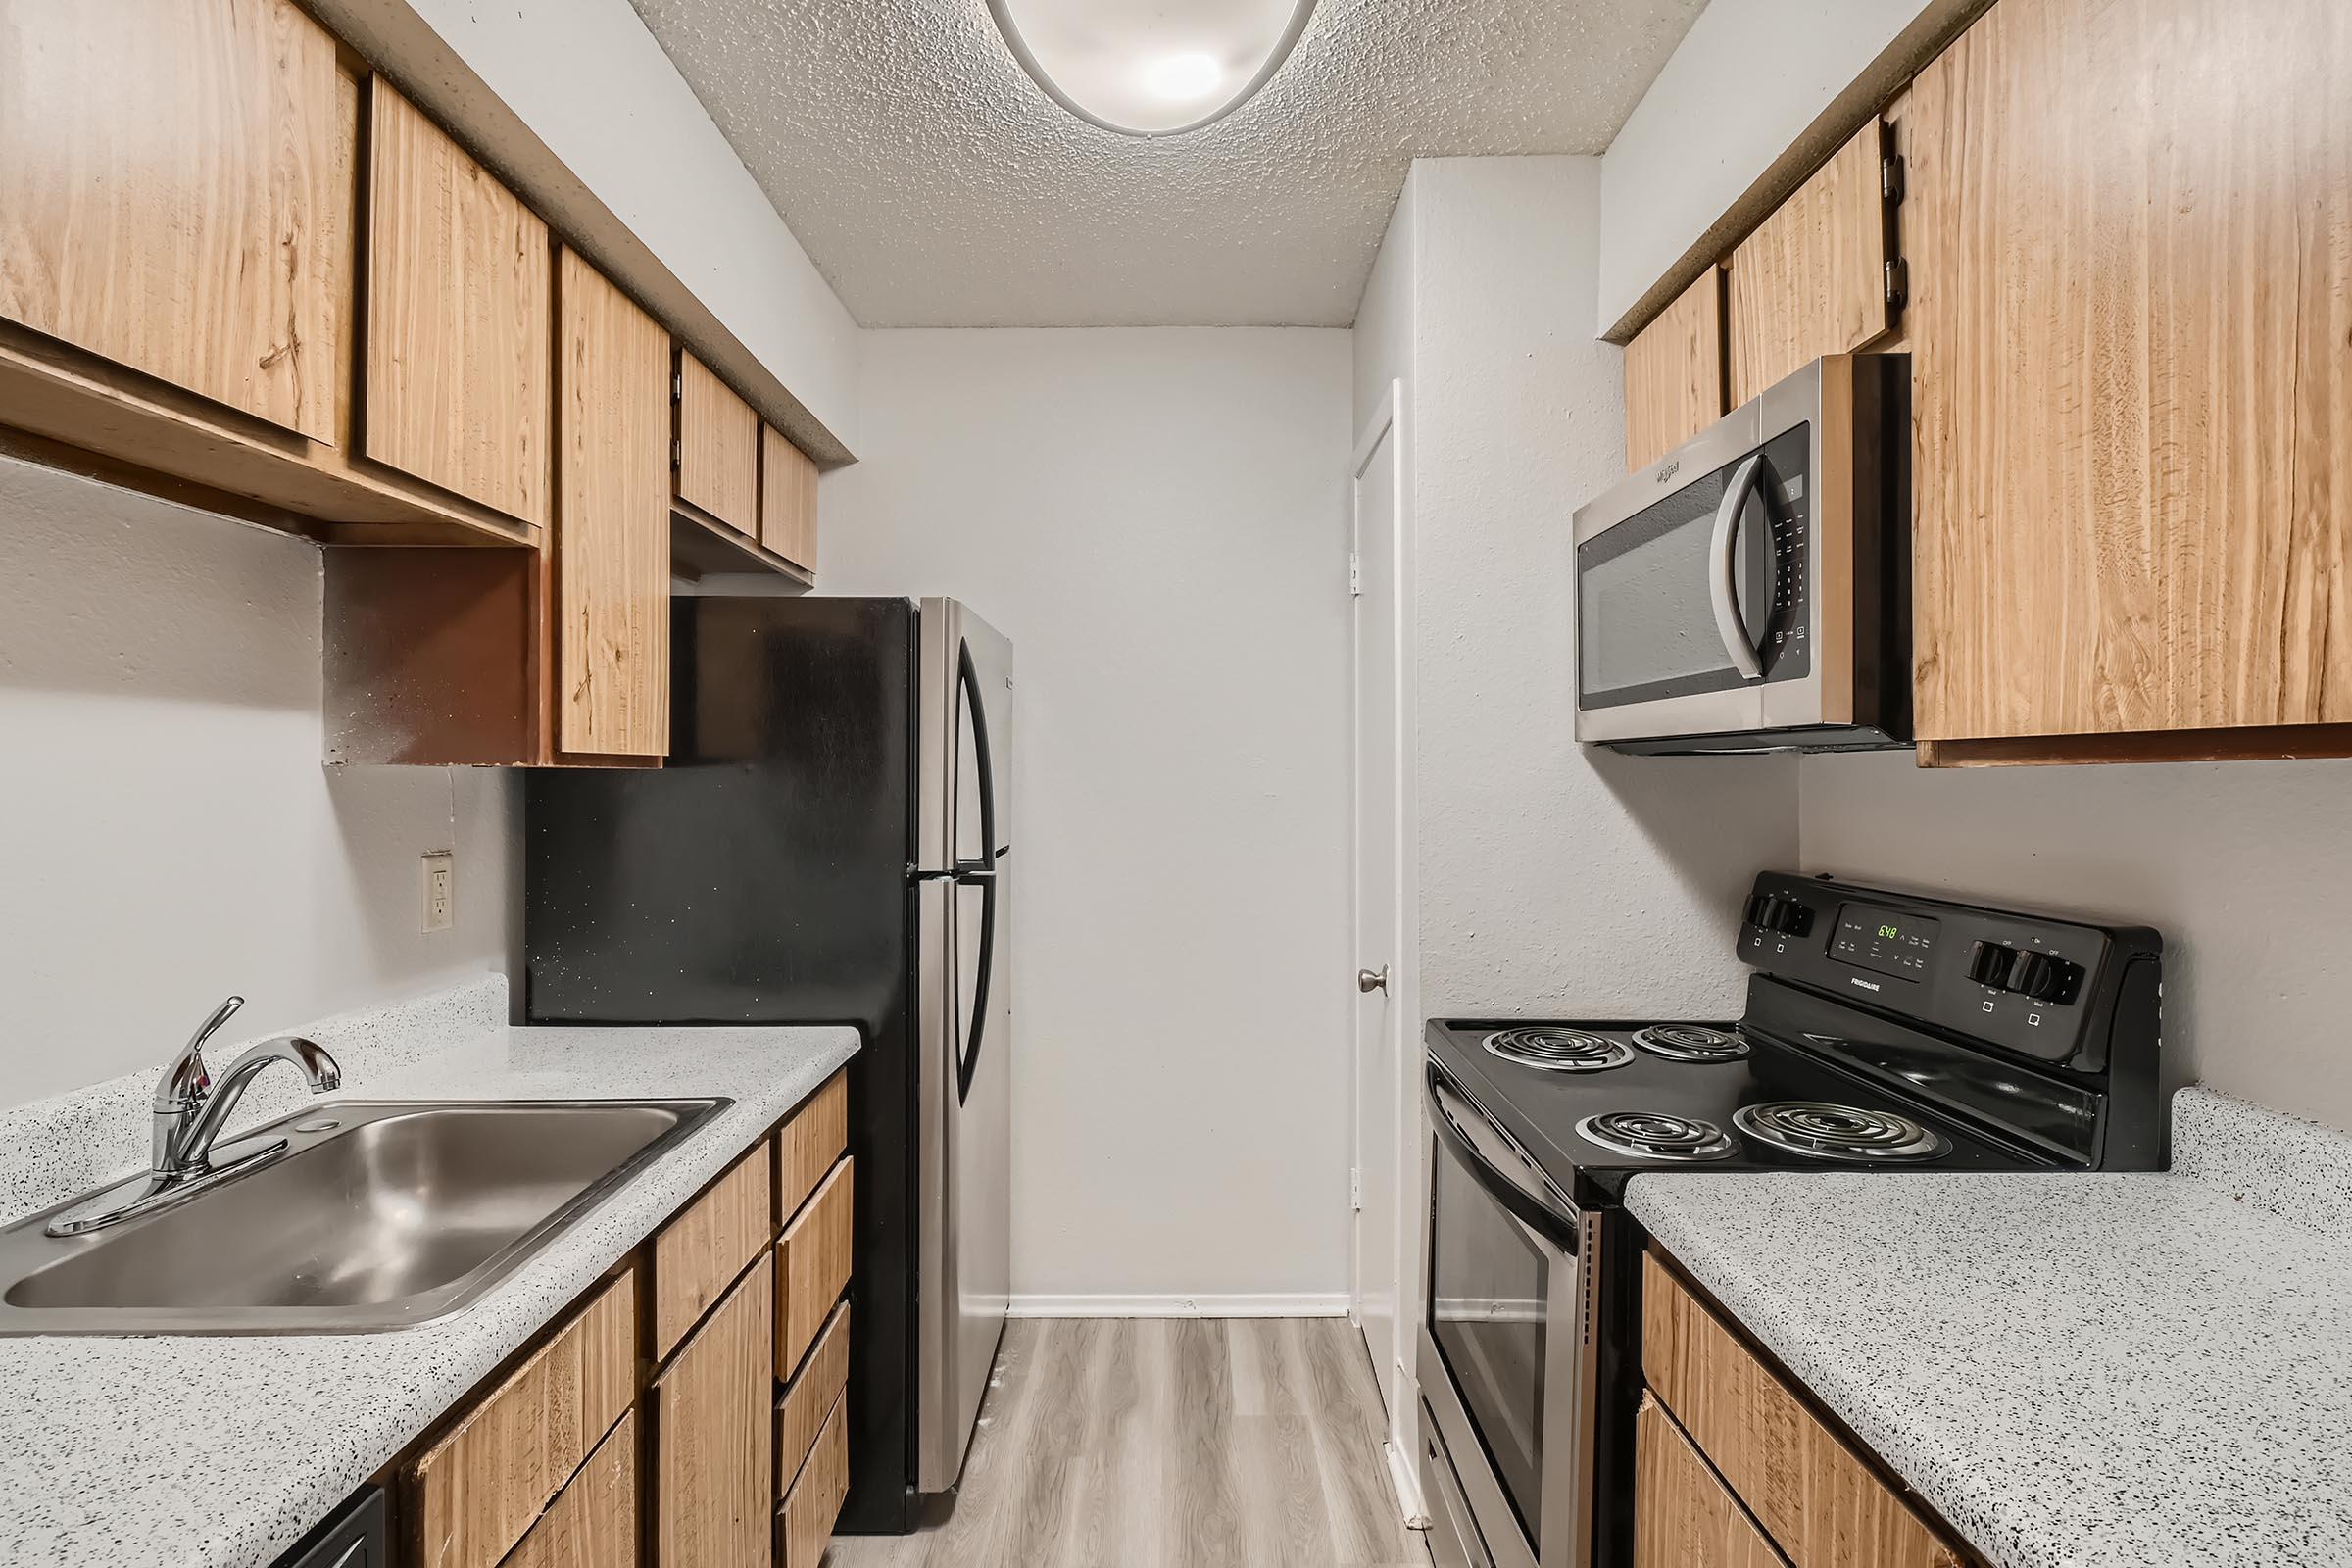 An apartment kitchen with stainless steel appliances at Rise North Arlington.